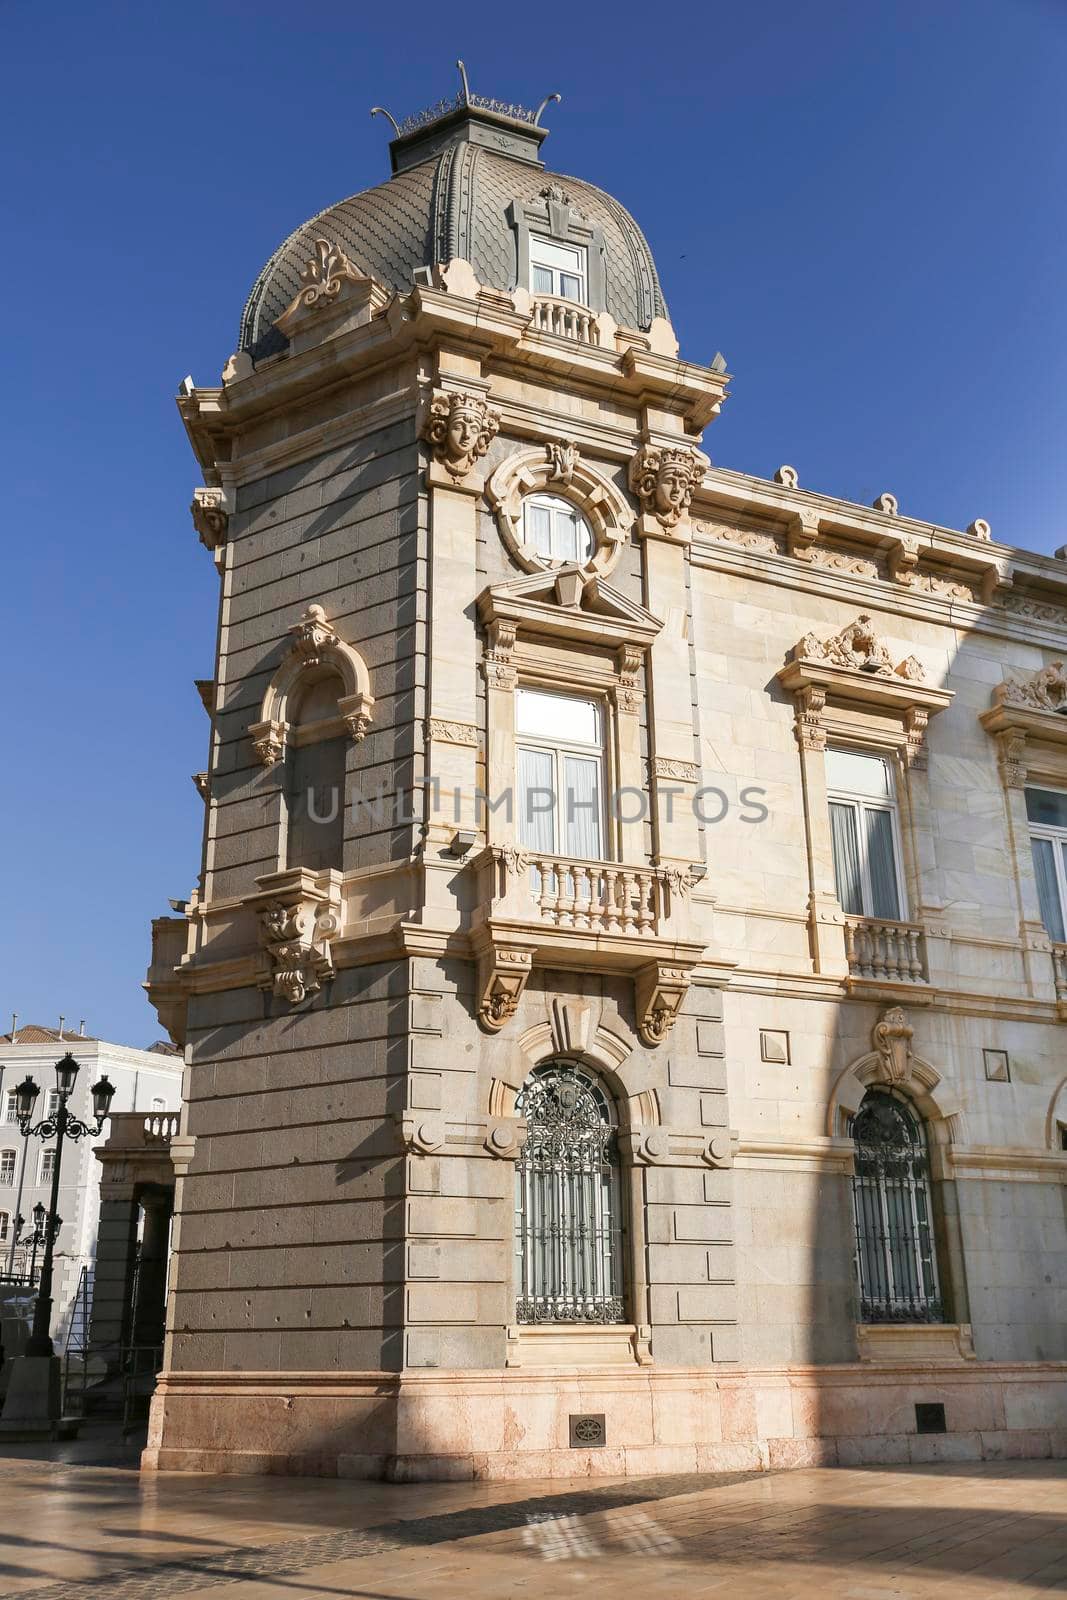 Cartagena, Murcia, Spain- July 17, 2022: Beautiful and colossal town hall of Cartagena city on a sunny day of summer